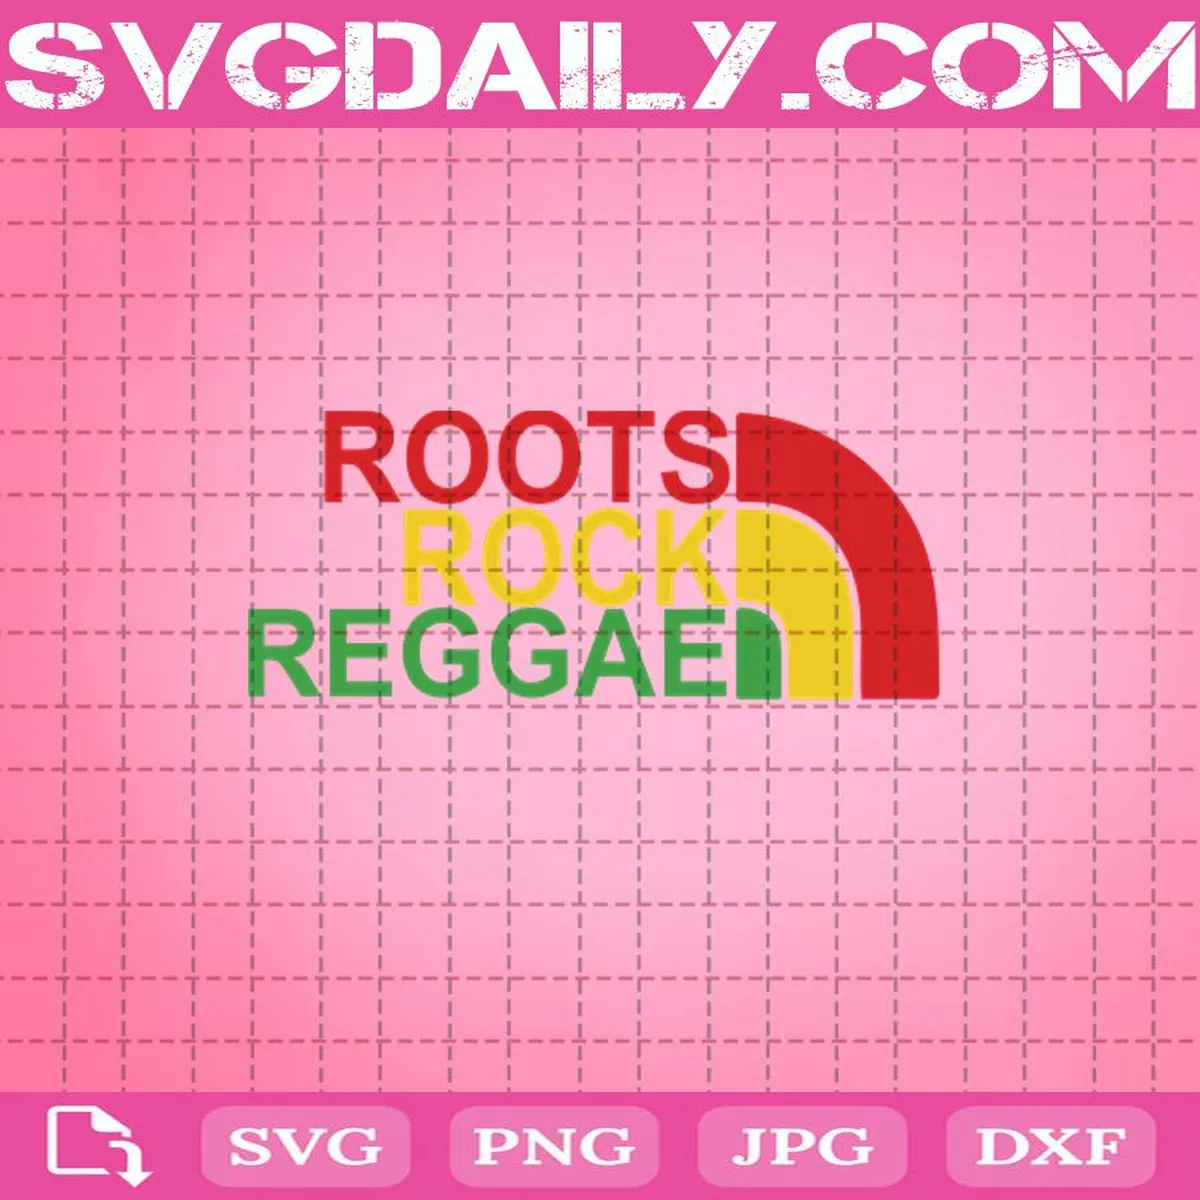 Roots Rock Reggae Svg - Svgdaily Daily Free Premium Svg Files